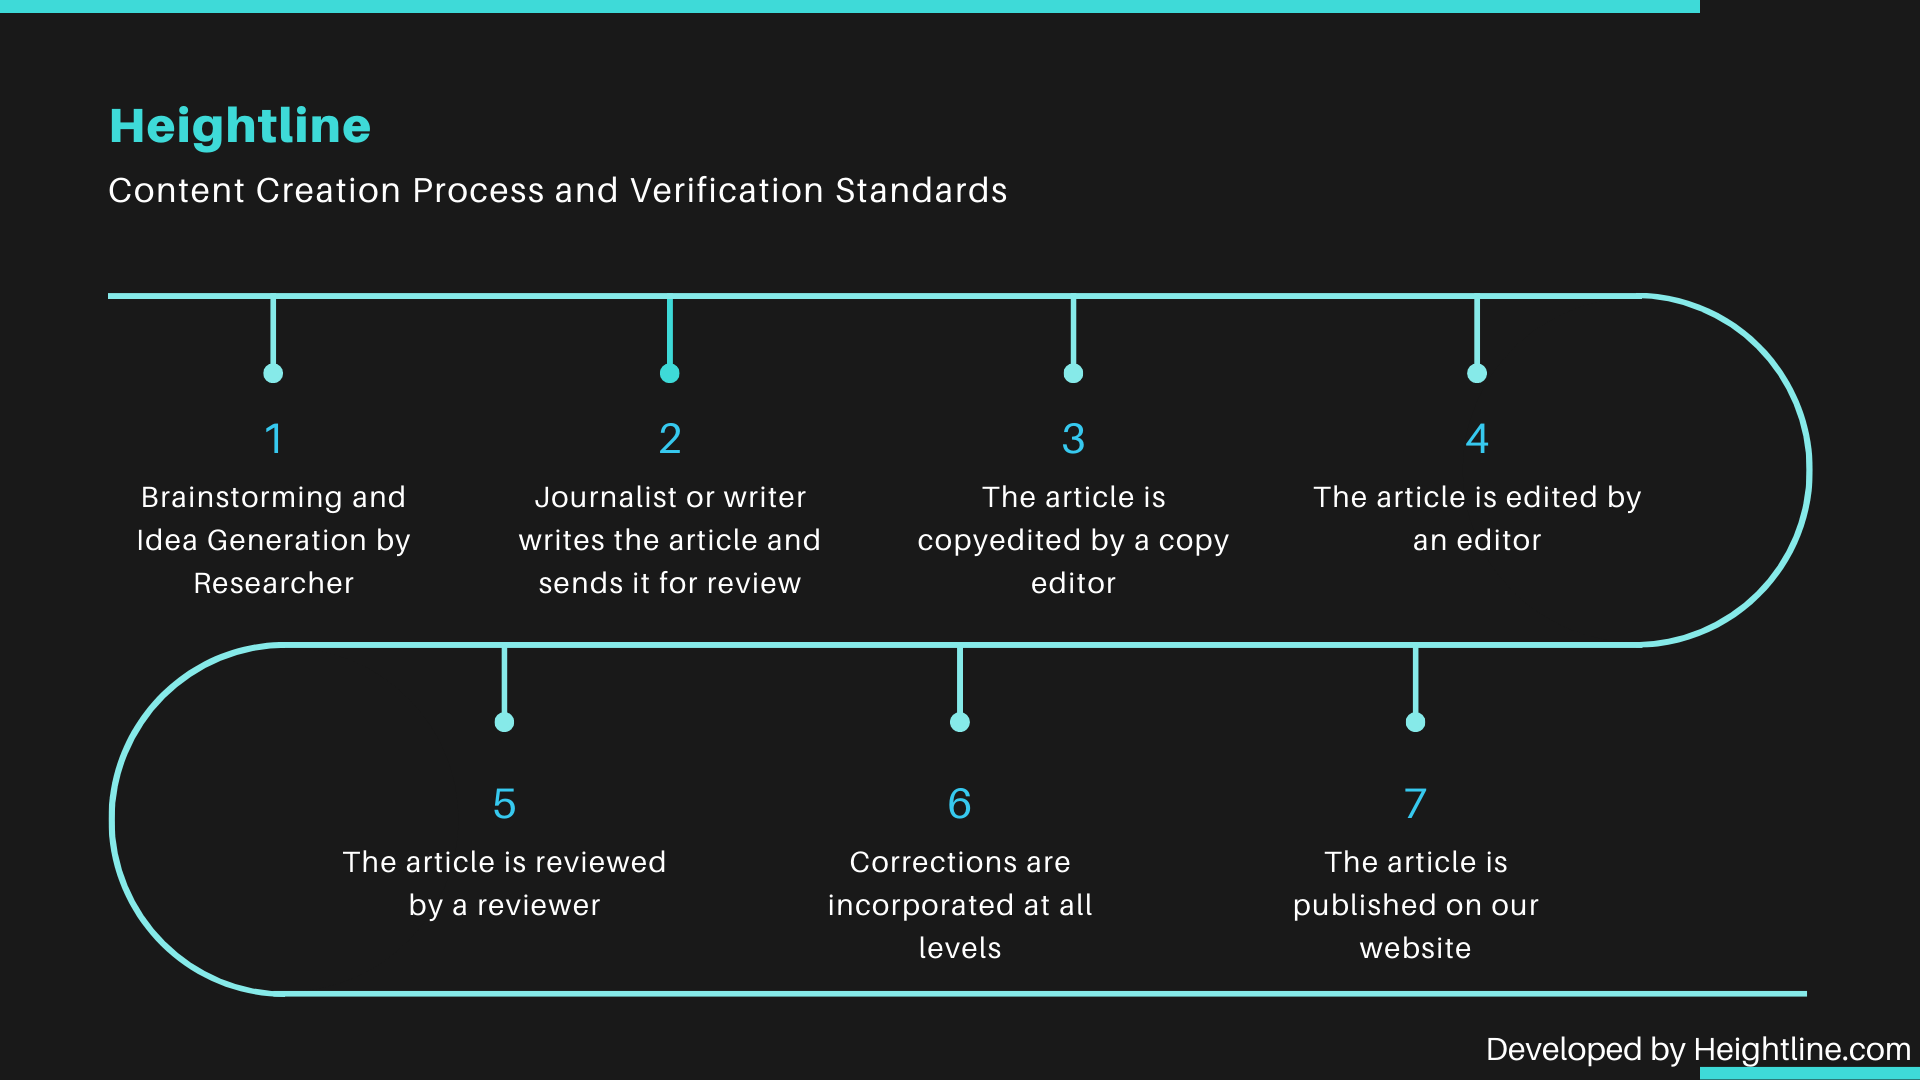 Heightline content creation process and verification